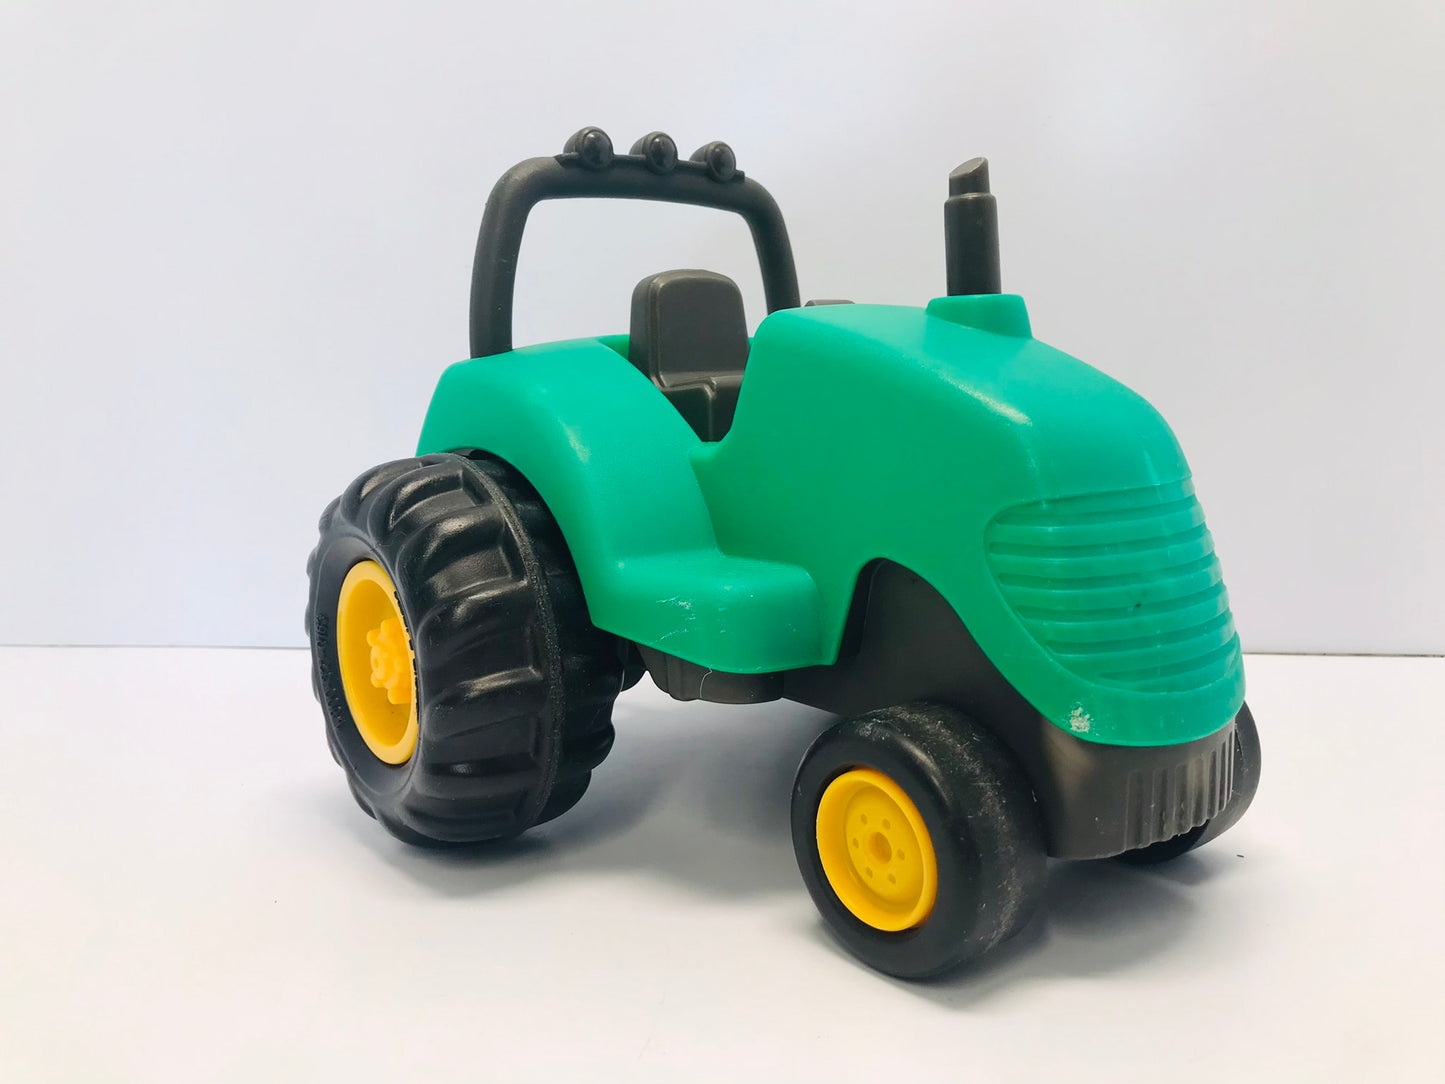 Little Tikes Vintage 1990's Large Farm Tractor 8 inch